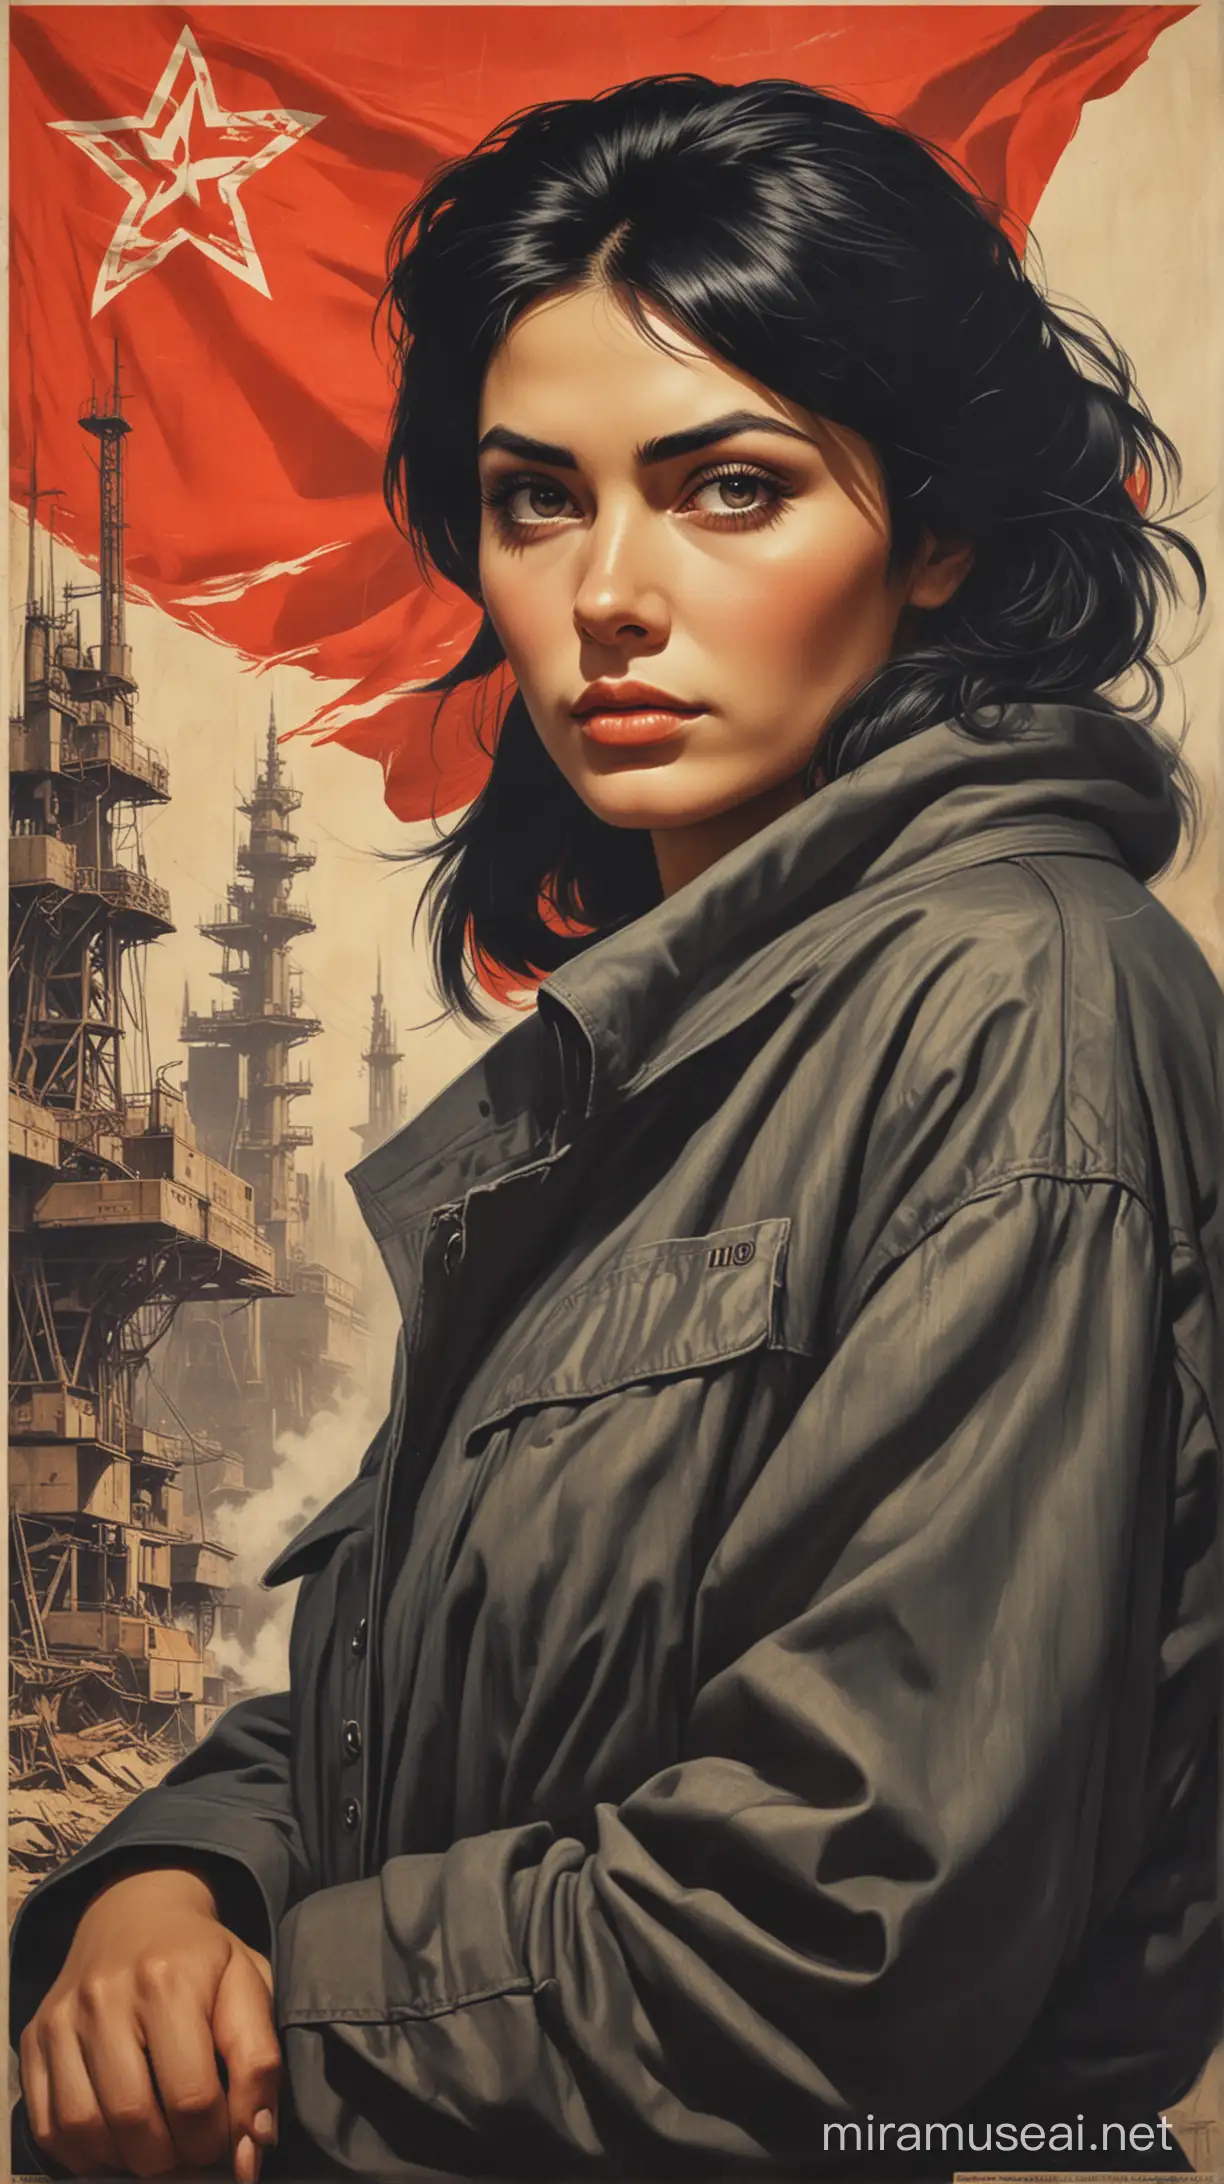 soviet retro poster, portrait of working class woman with black hair and thick eyebrows, oversized clothes, looking for the hope and freedom, hi-tech, soviet cyberpank, noise effect, soviet retro poster  